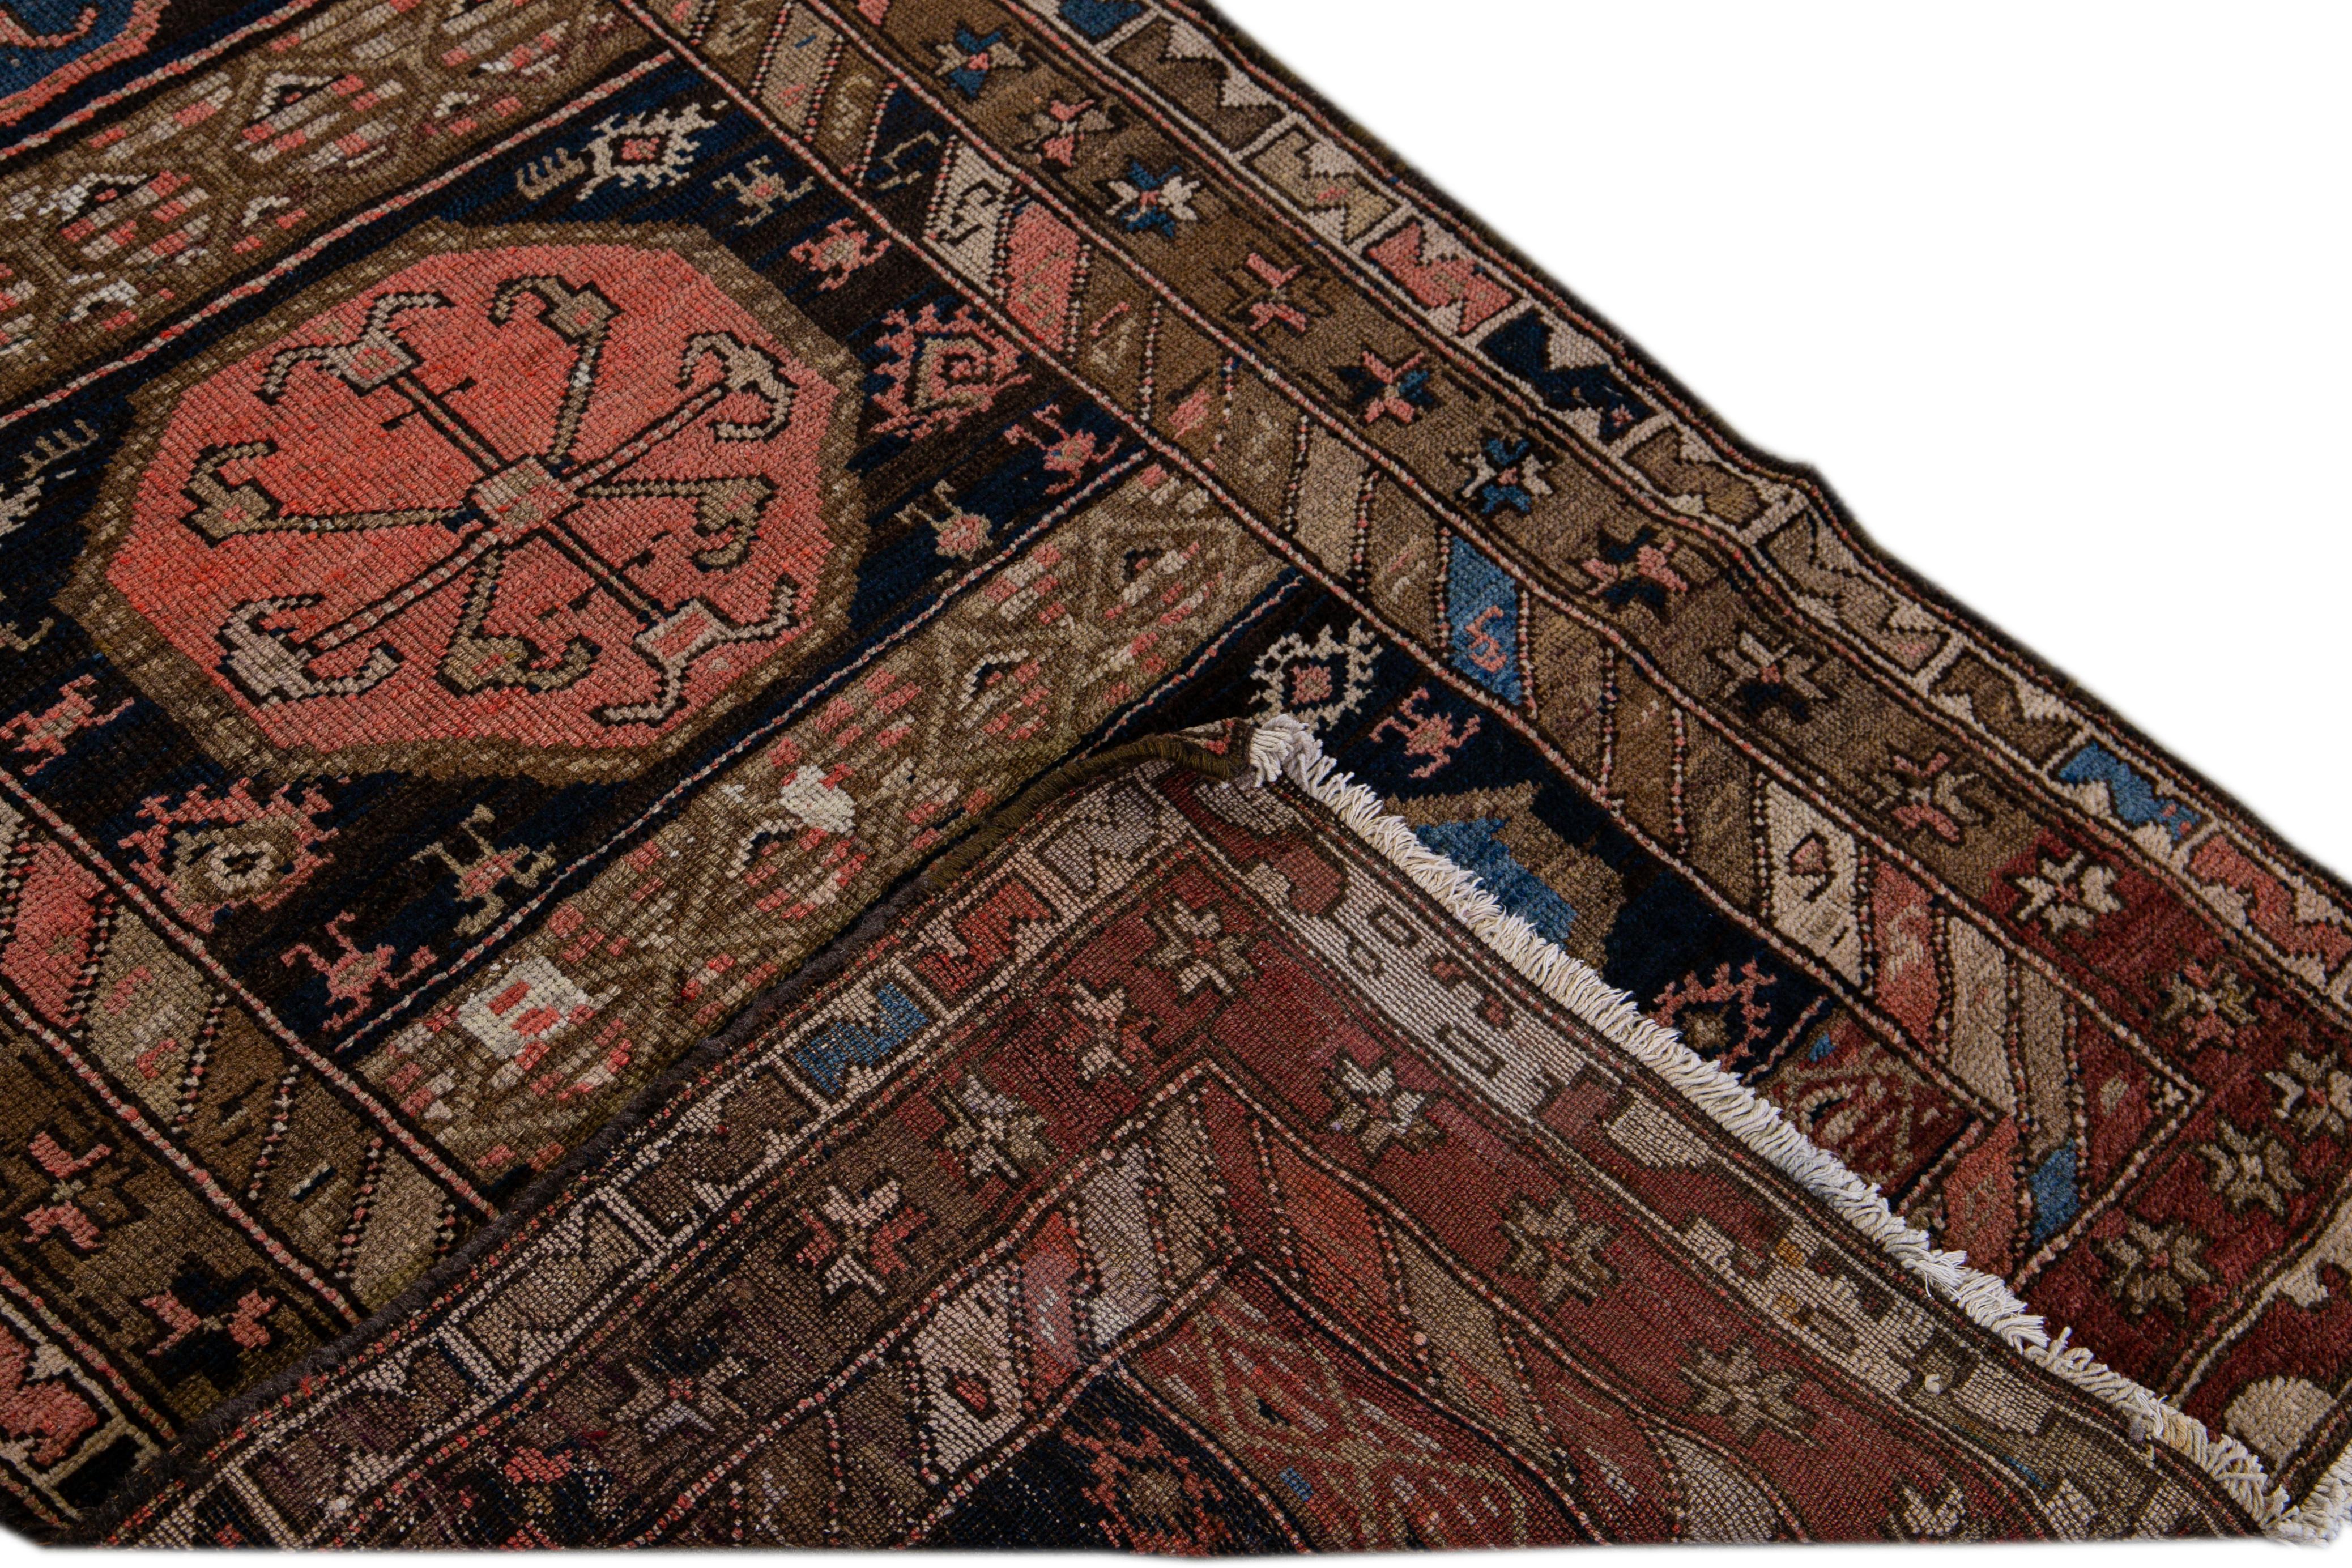 Beautiful antique Persian Kurd rug with a geometric medallion motif. This piece has fine details, great colors, and a beautiful design. It would be the perfect addition to your home. 

This rug measures 3'2 x 10'5